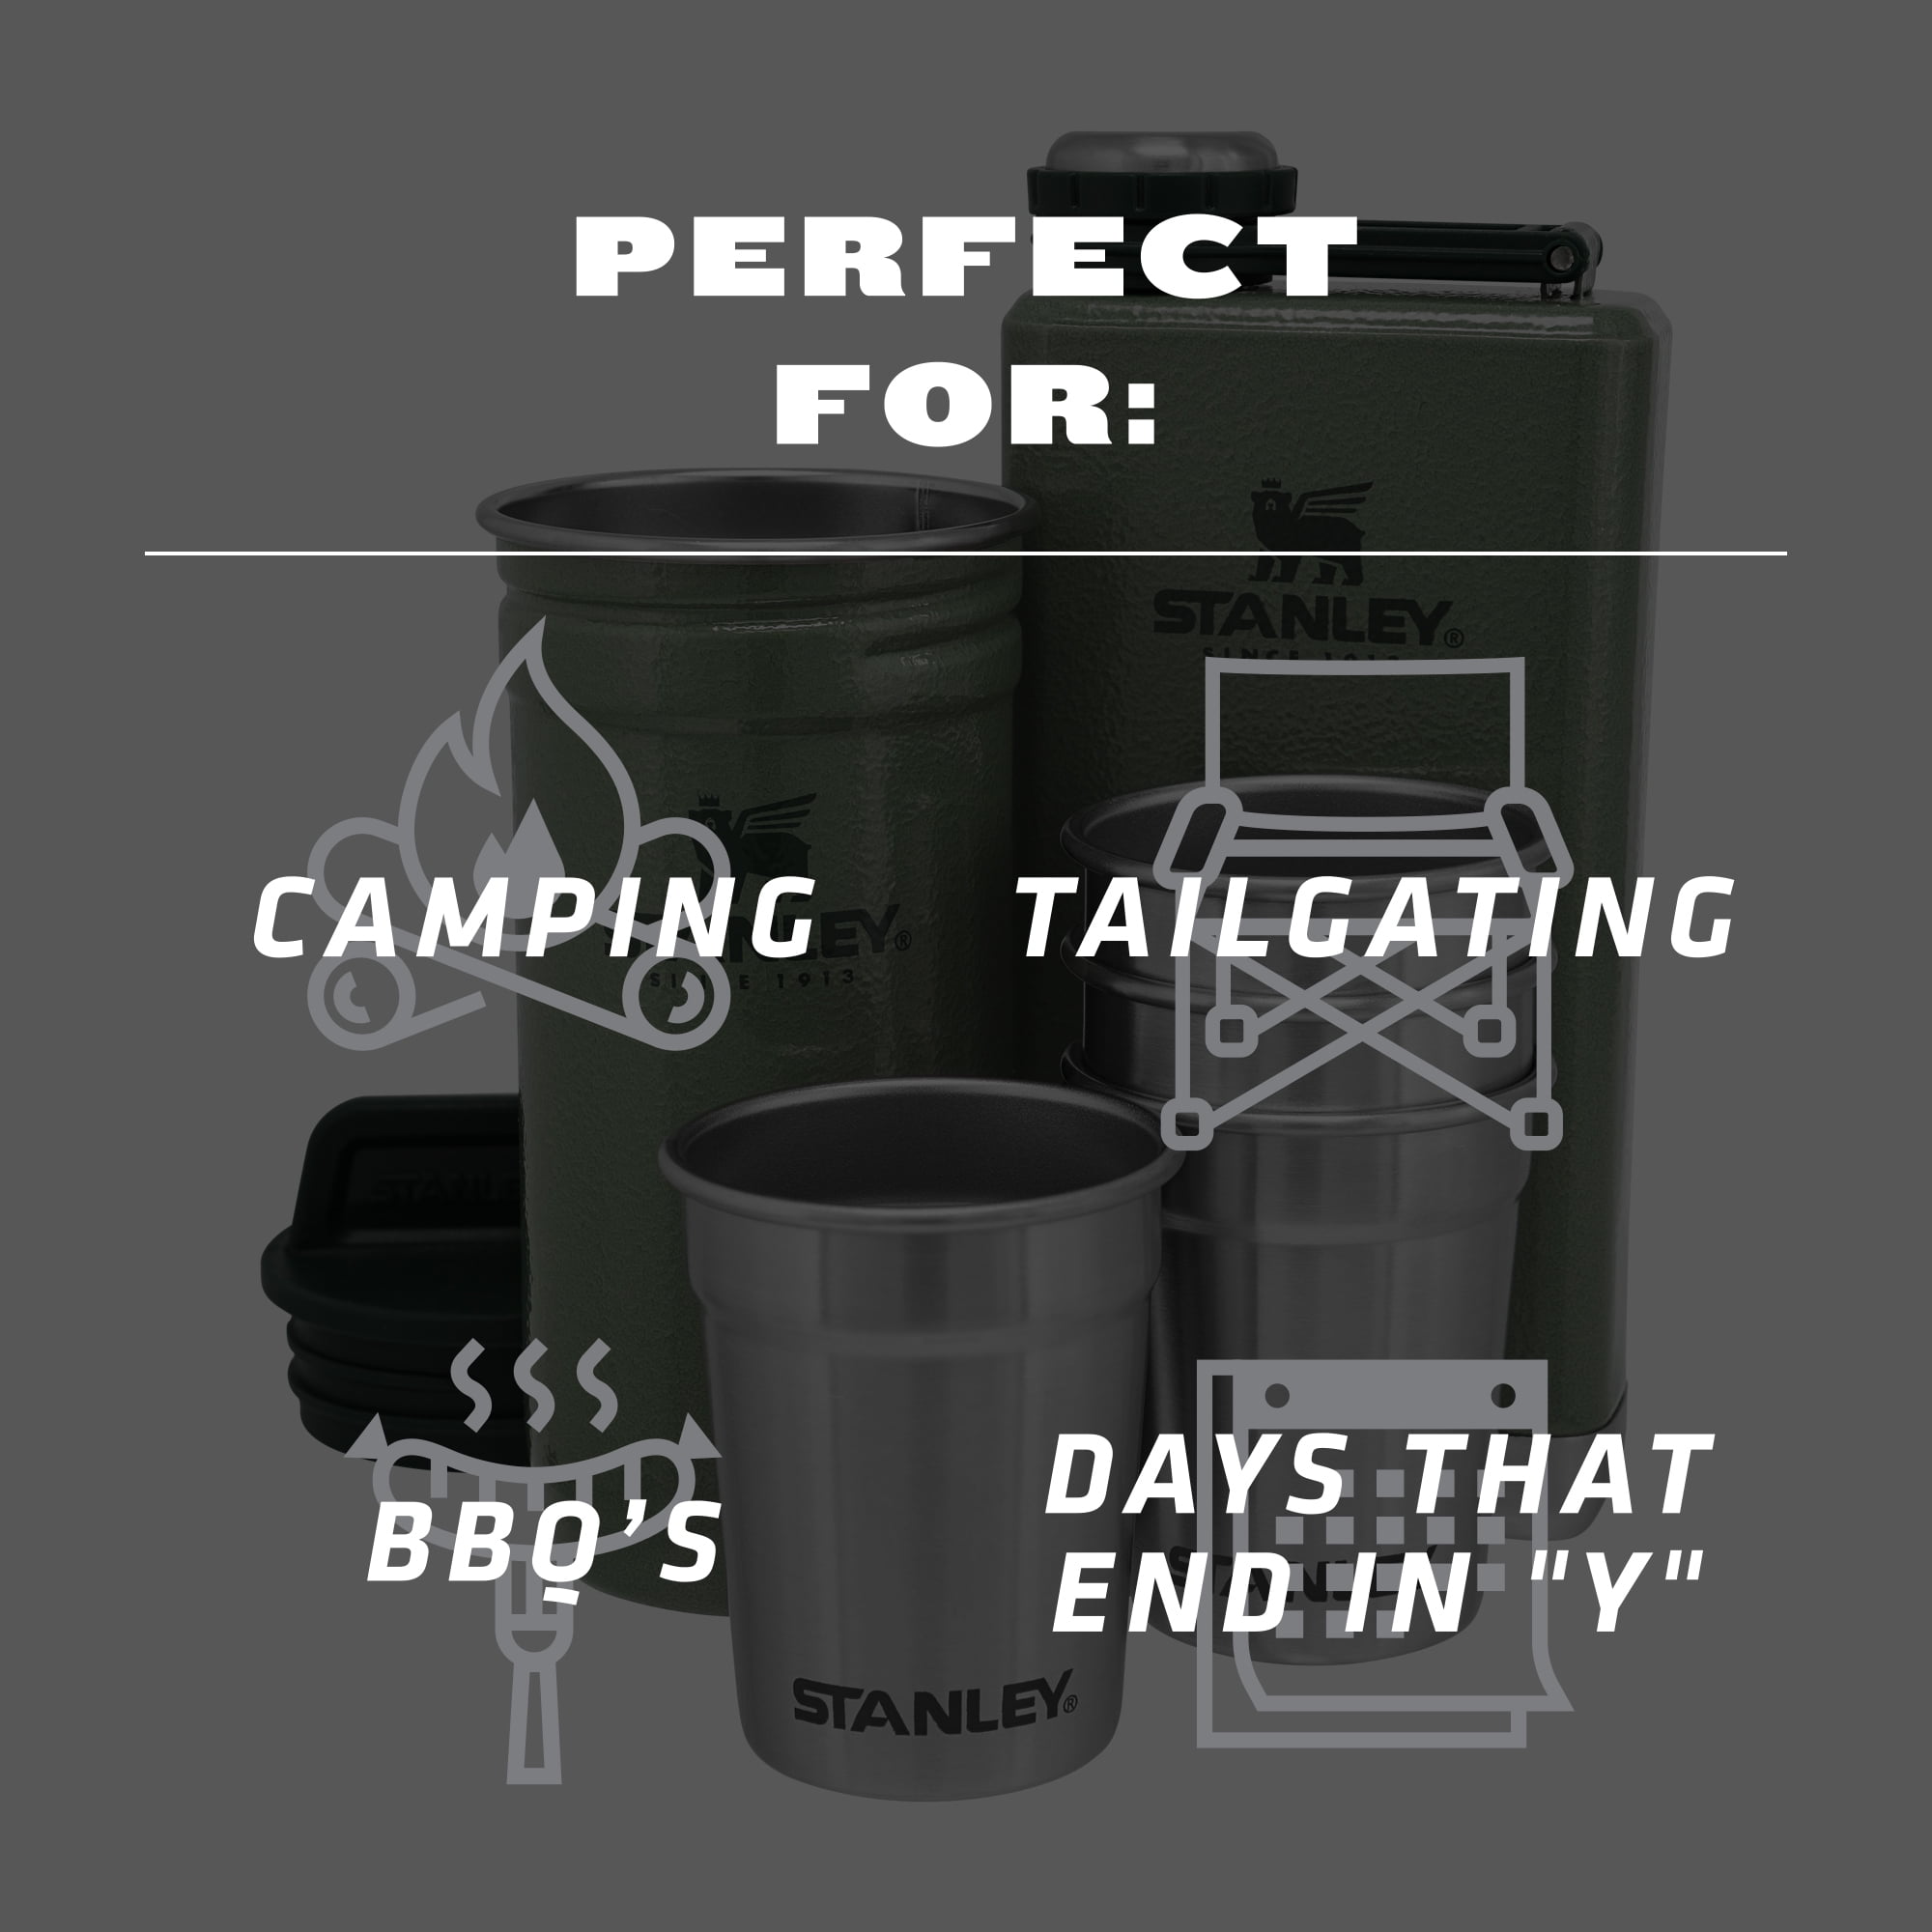 A Toast to the Great Outdoors: Unleash the Fun with the Stanley Adventure  Shot Glass + Flask Set😆 #stanleymysg #stanley #builtforlife